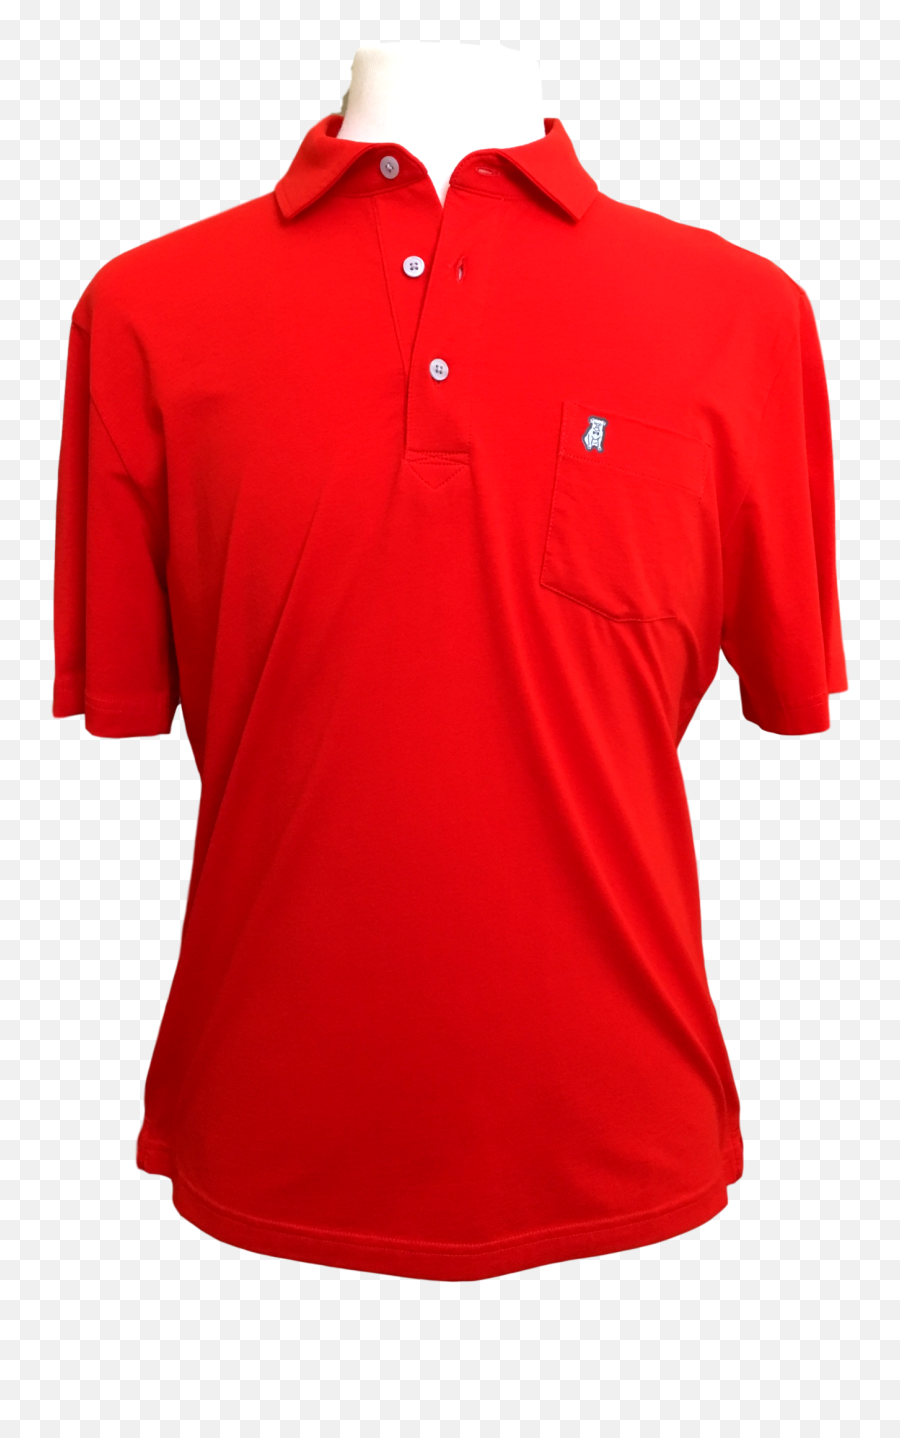 The Dapper Dog Flagship Polo - Fiery Red Red Polo Shirt Png,Red Shirt Png